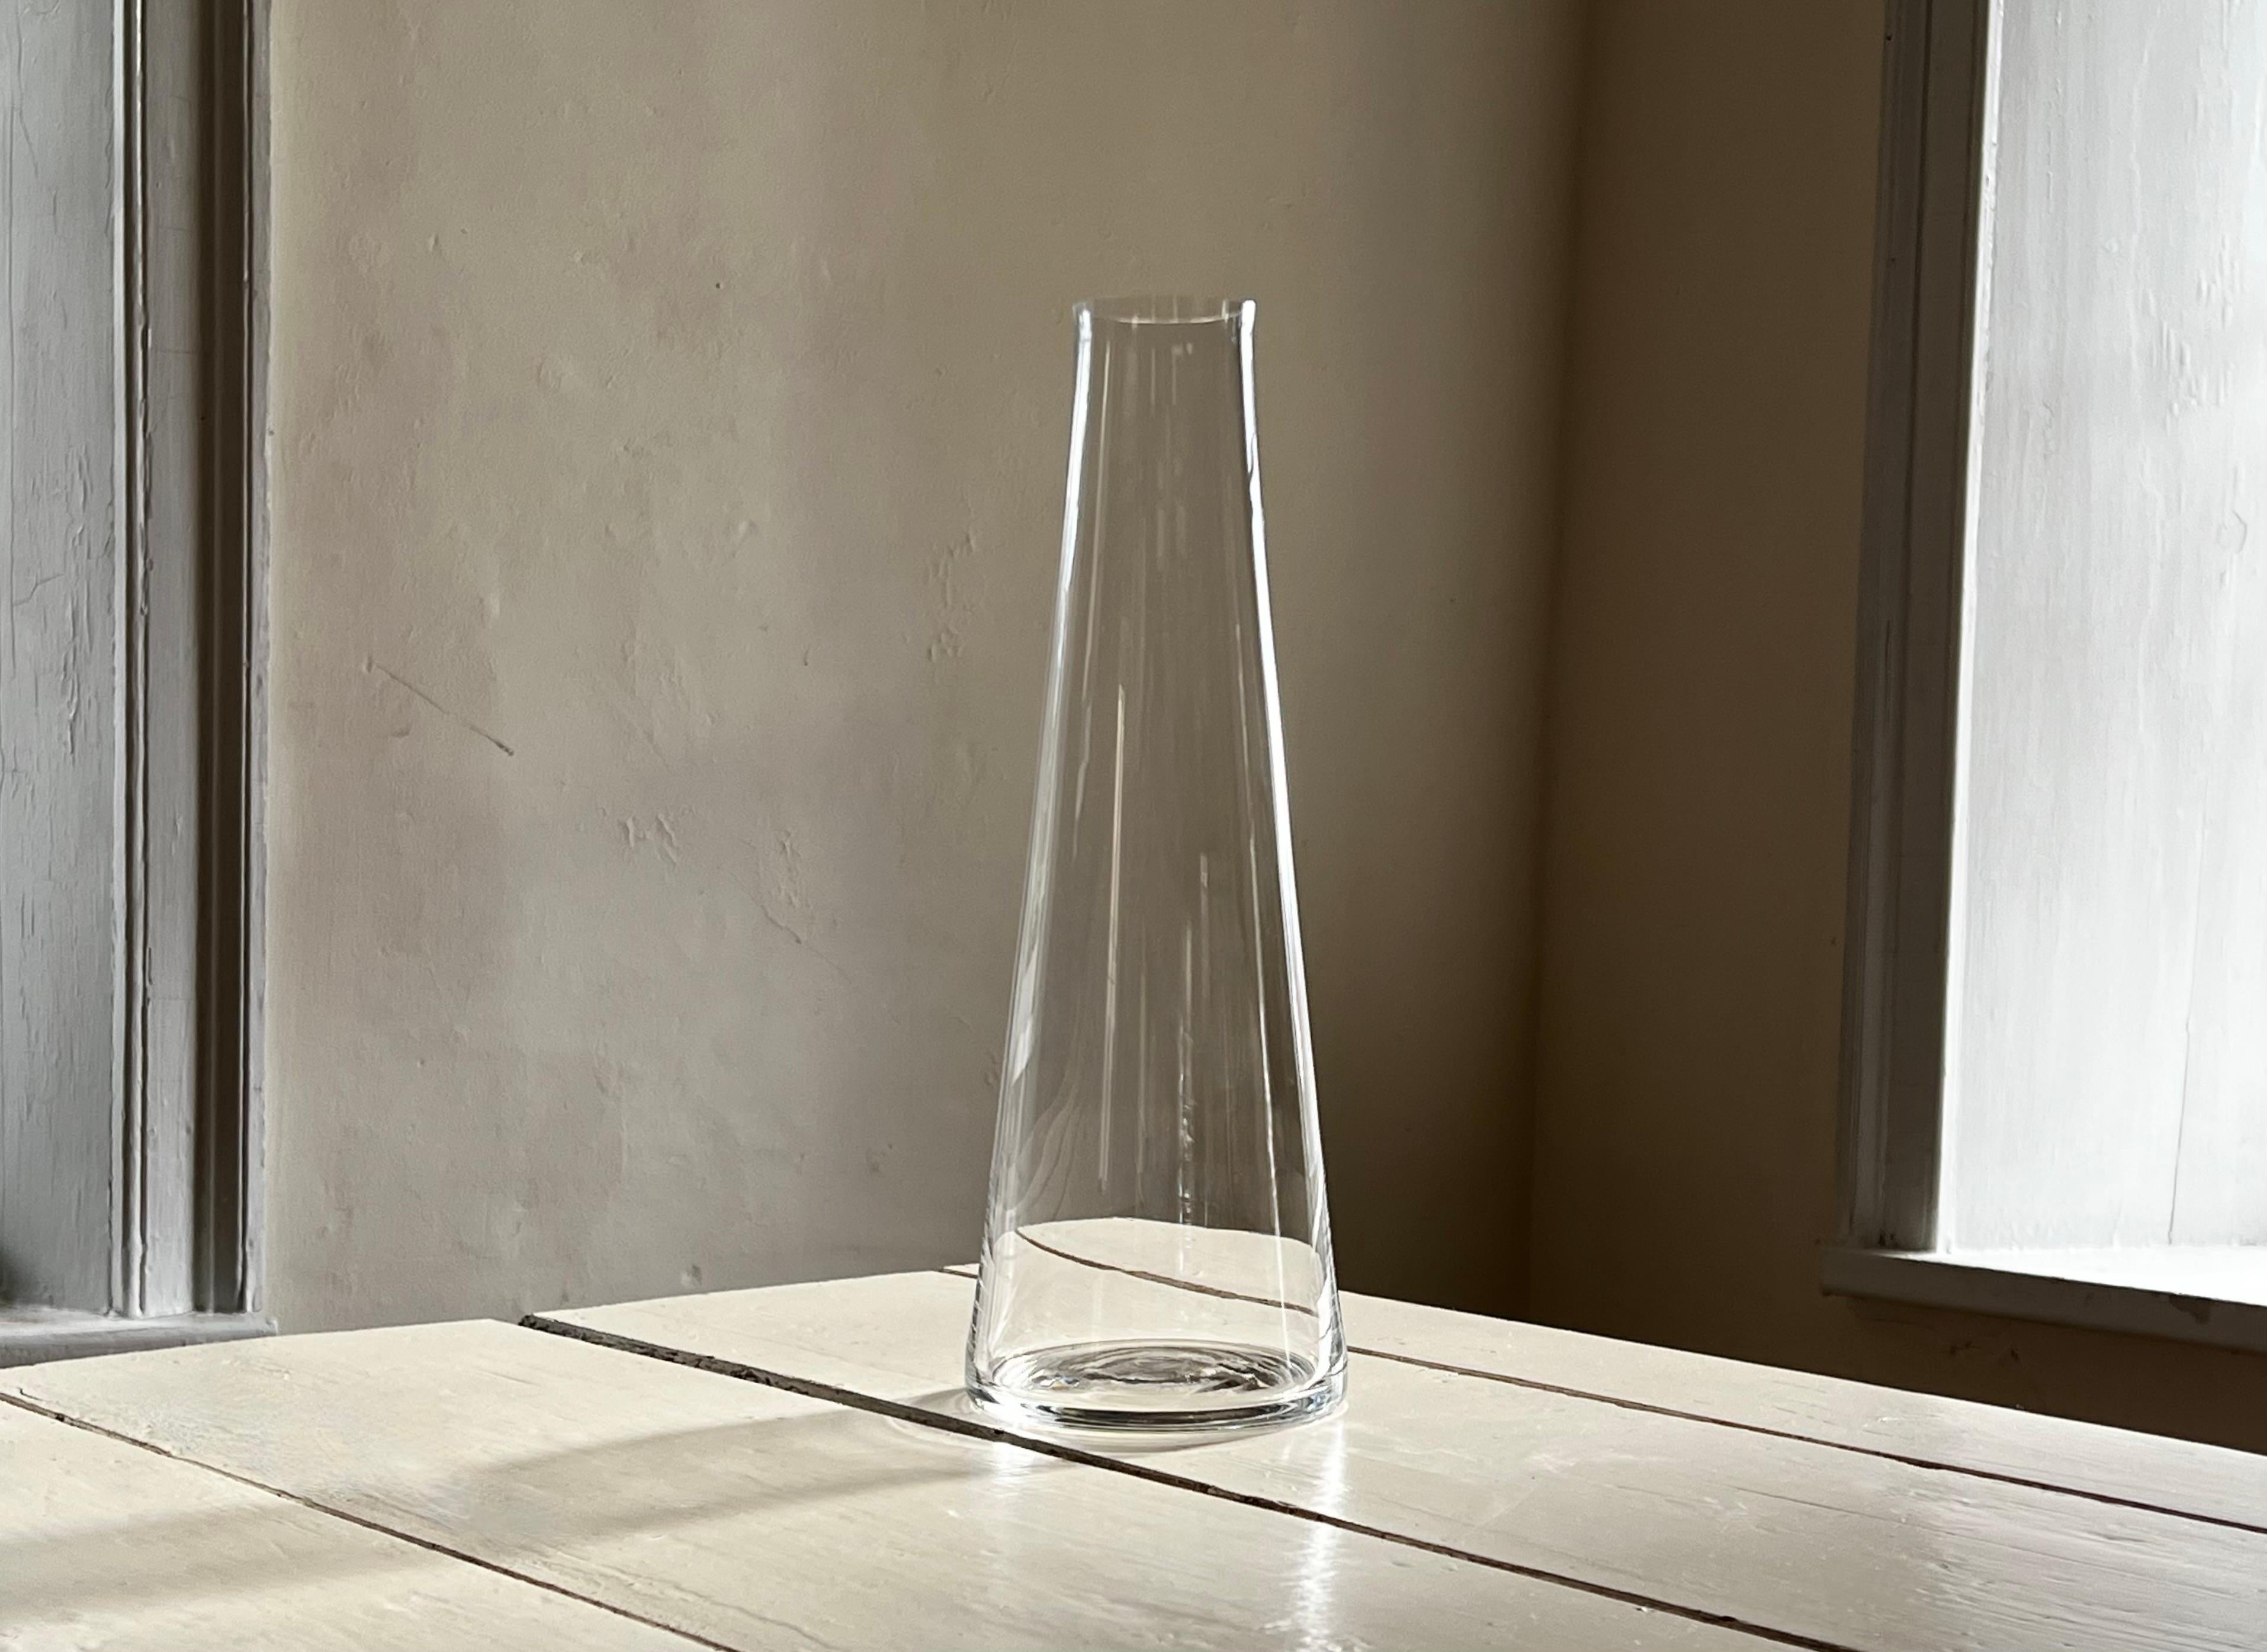 The Deborah Ehrlich Crystal Water Decanter was designed in collaboration with Laureen Barber and Philippe Gouze for Dan Barber's James Beard Award winning restaurant, Blue Hill at Stone Barns.  The elegant, pared down form creates a beautiful